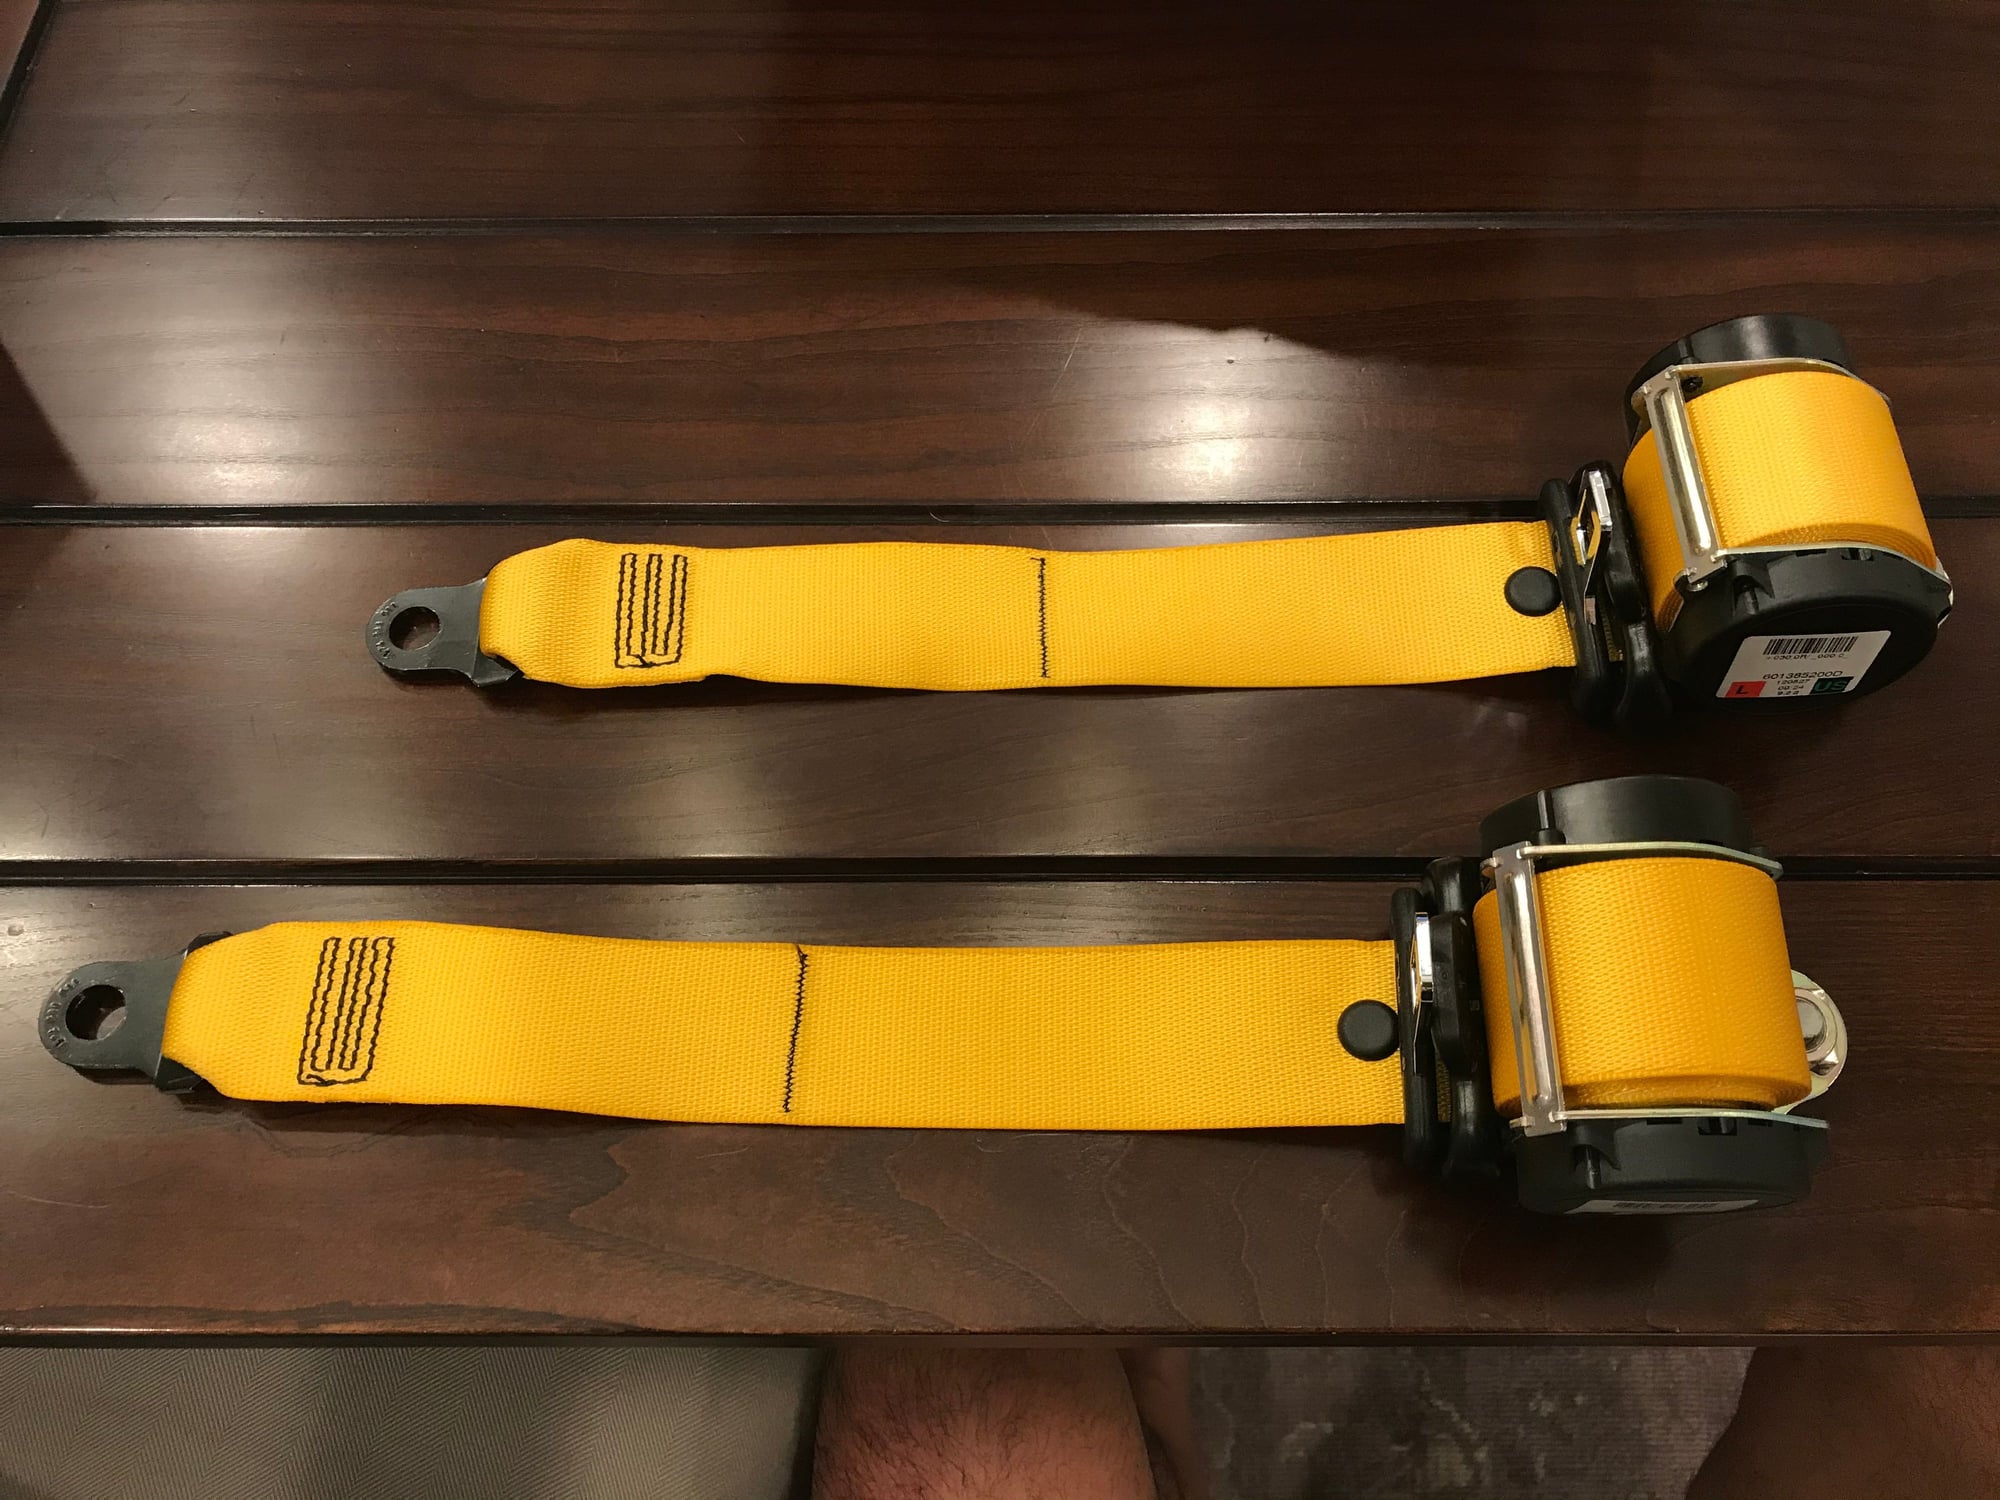 Interior/Upholstery - 997 yellow rear seat belts 2x - Used - 2005 to 2011 Porsche 911 - Princeton, NJ 08540, United States